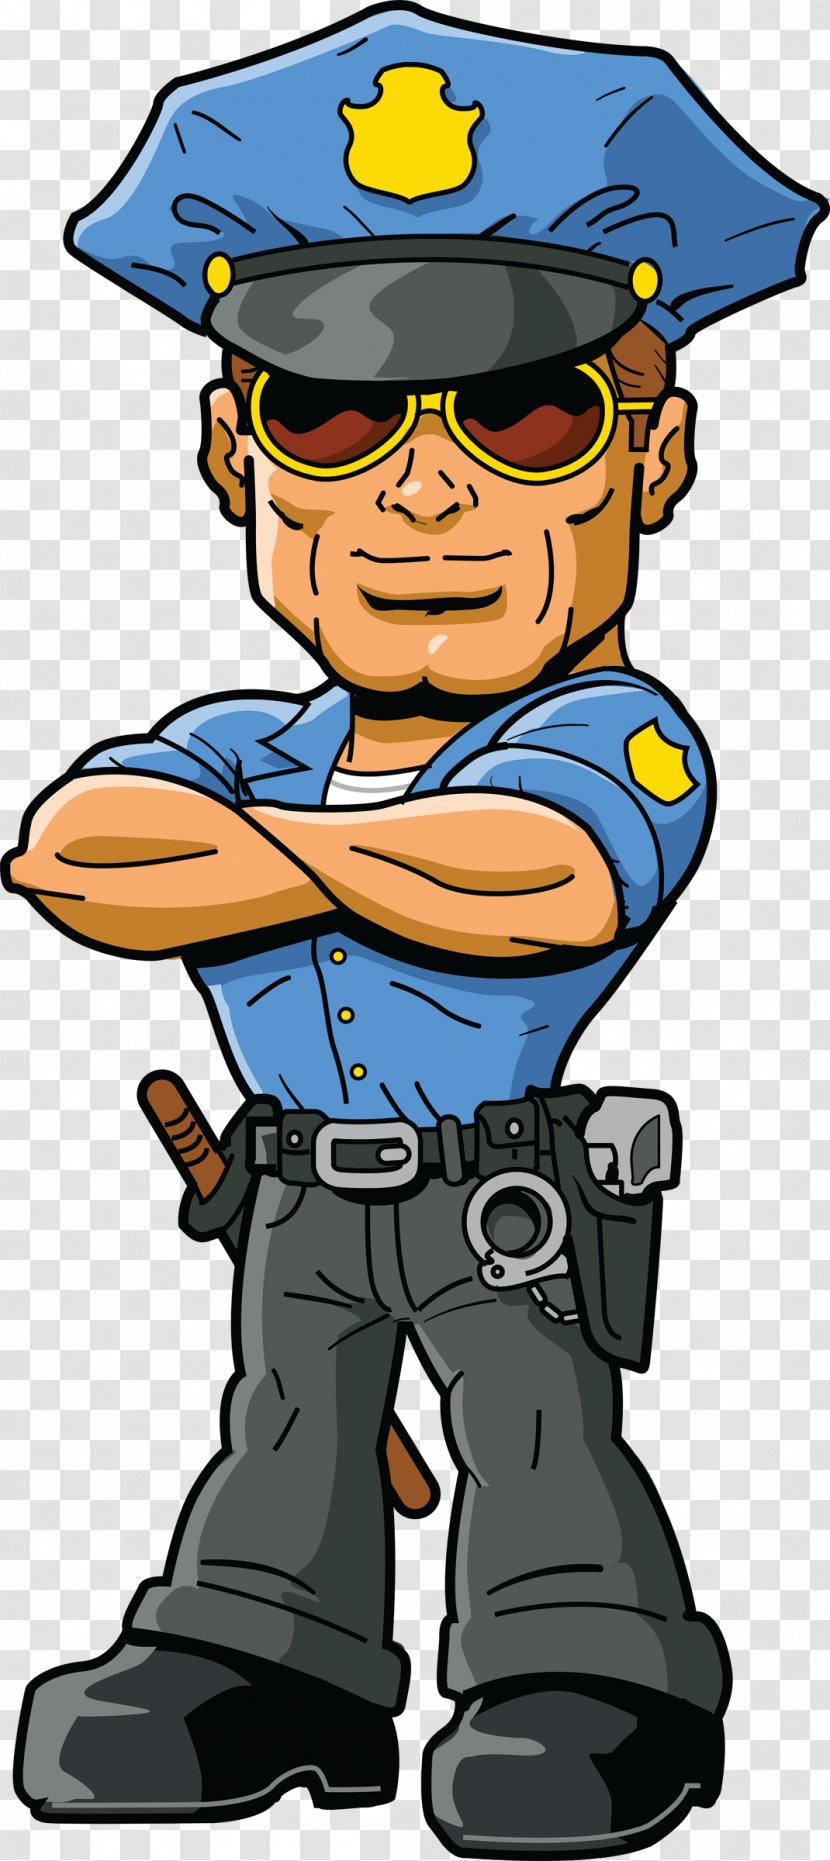 Police Officer Cartoon Clip Art - Drawing - Firefighter Transparent PNG